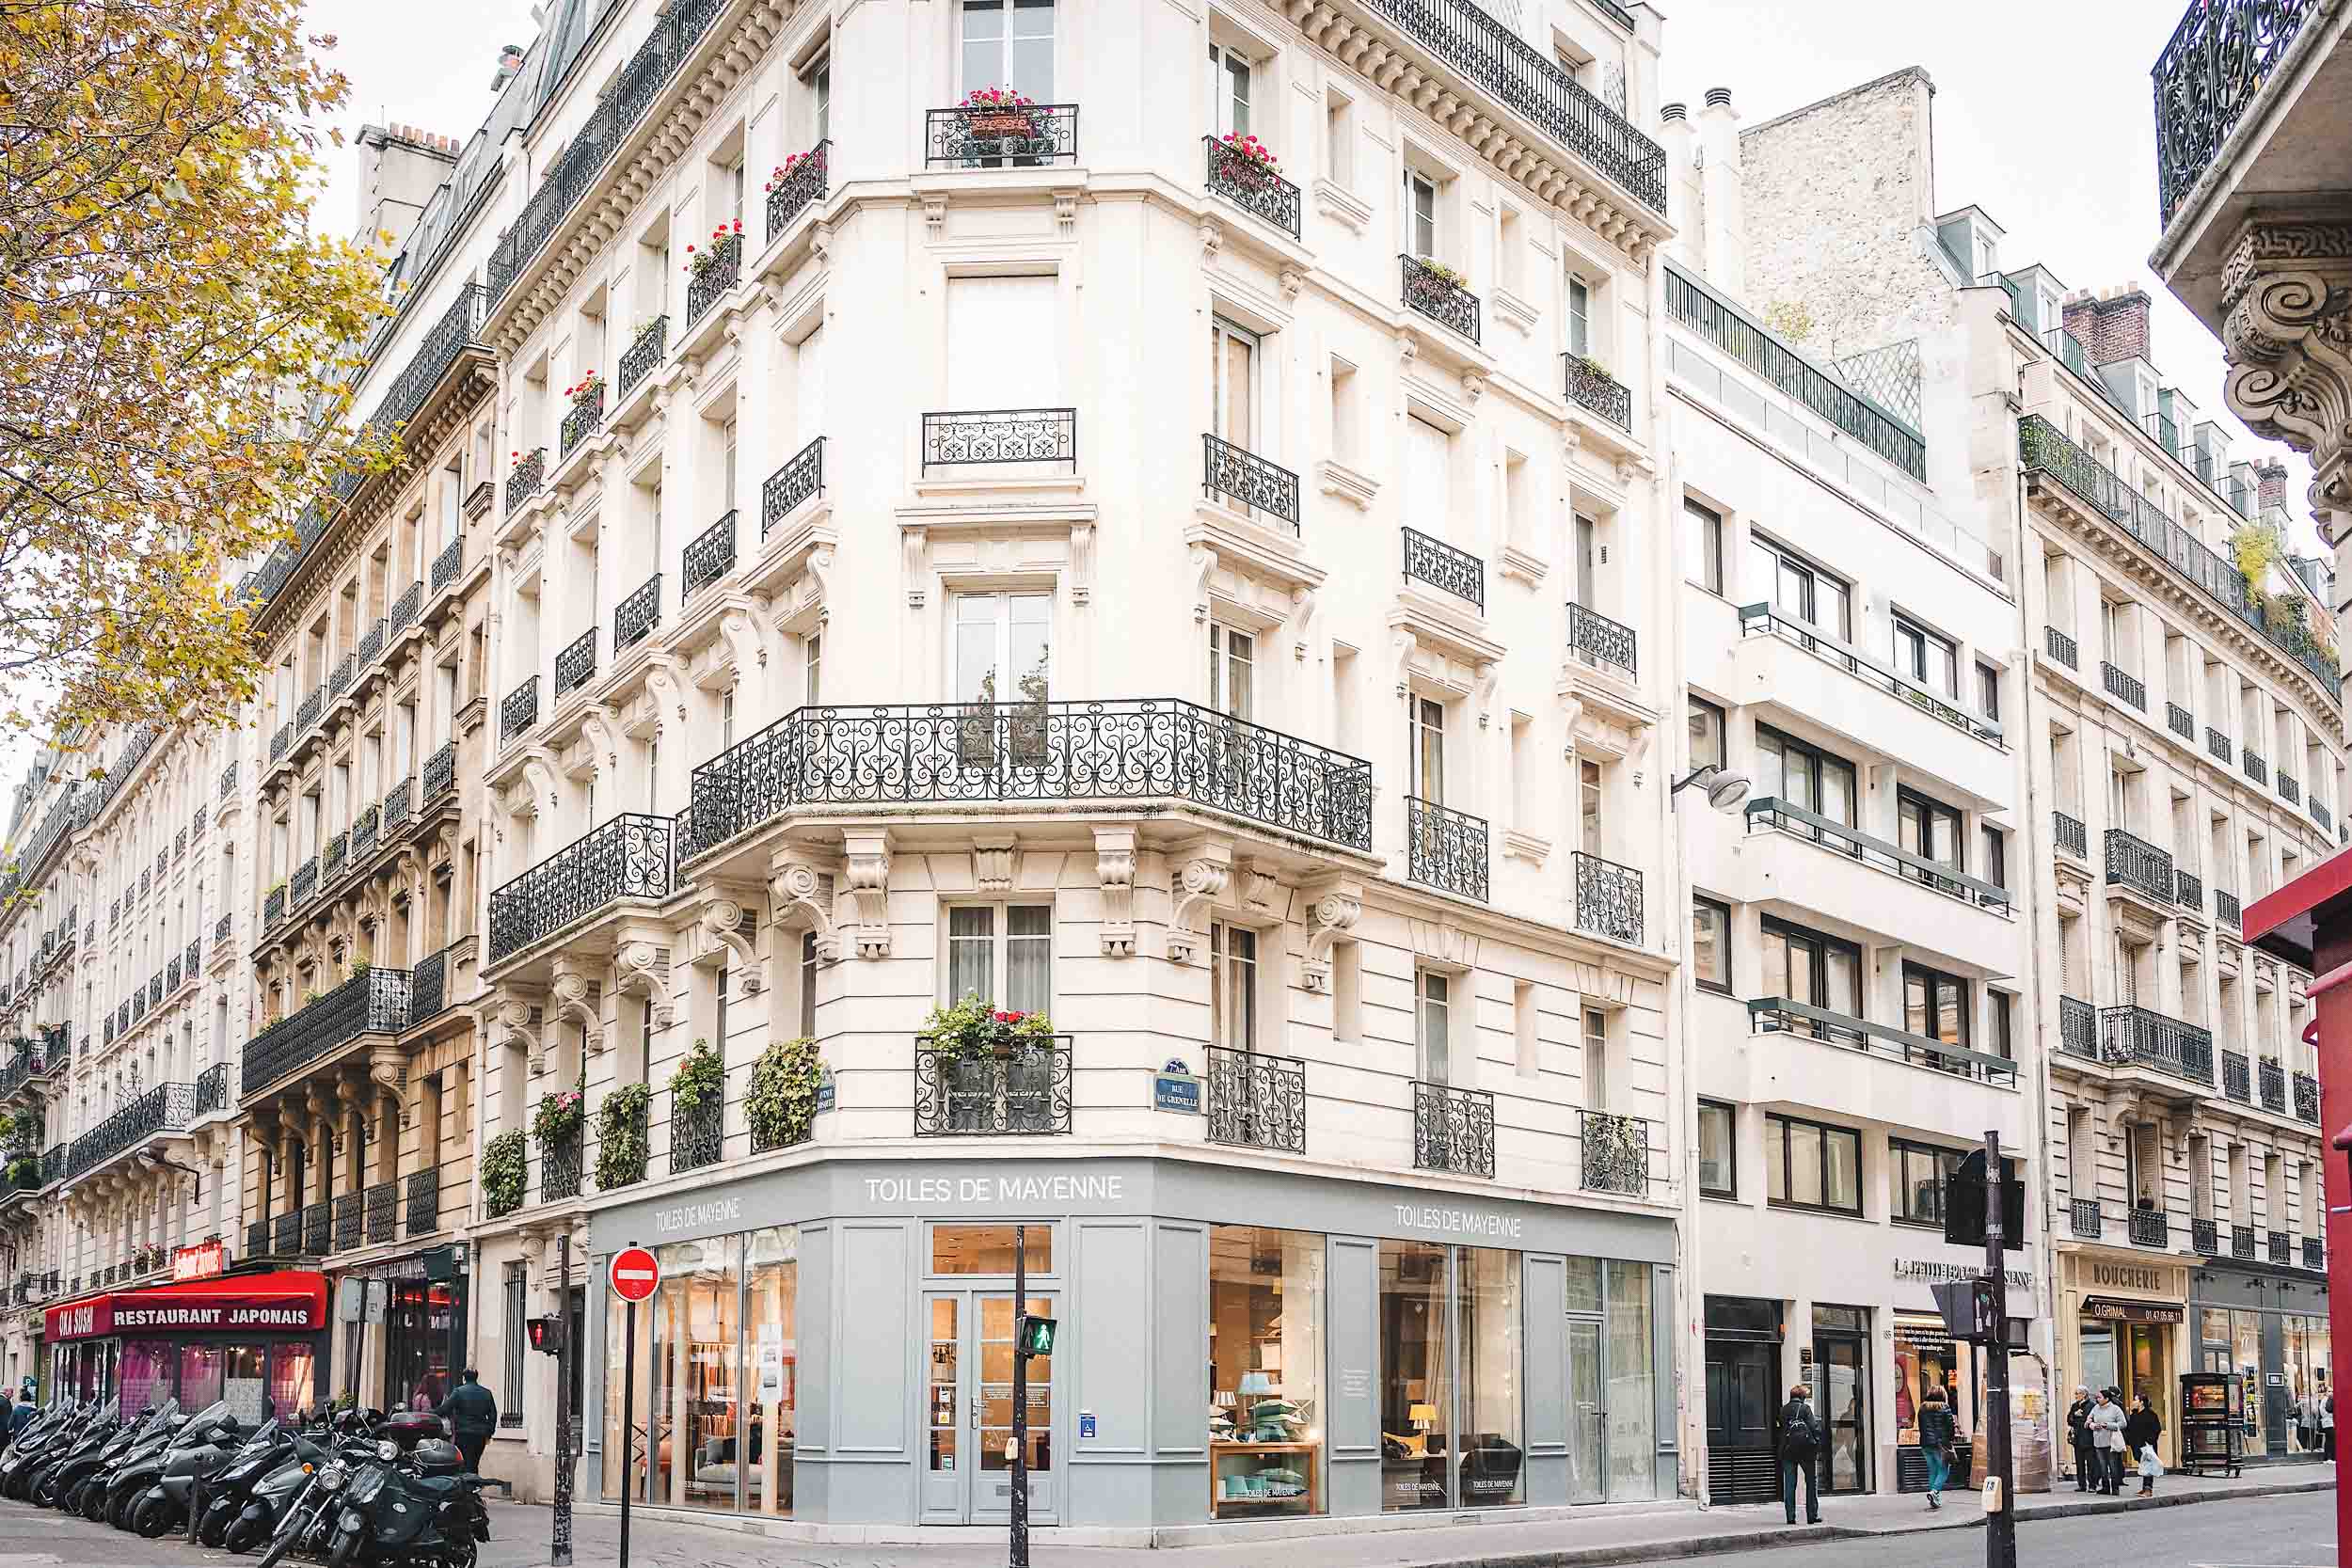 The best Paris itineraries all include these 8 things